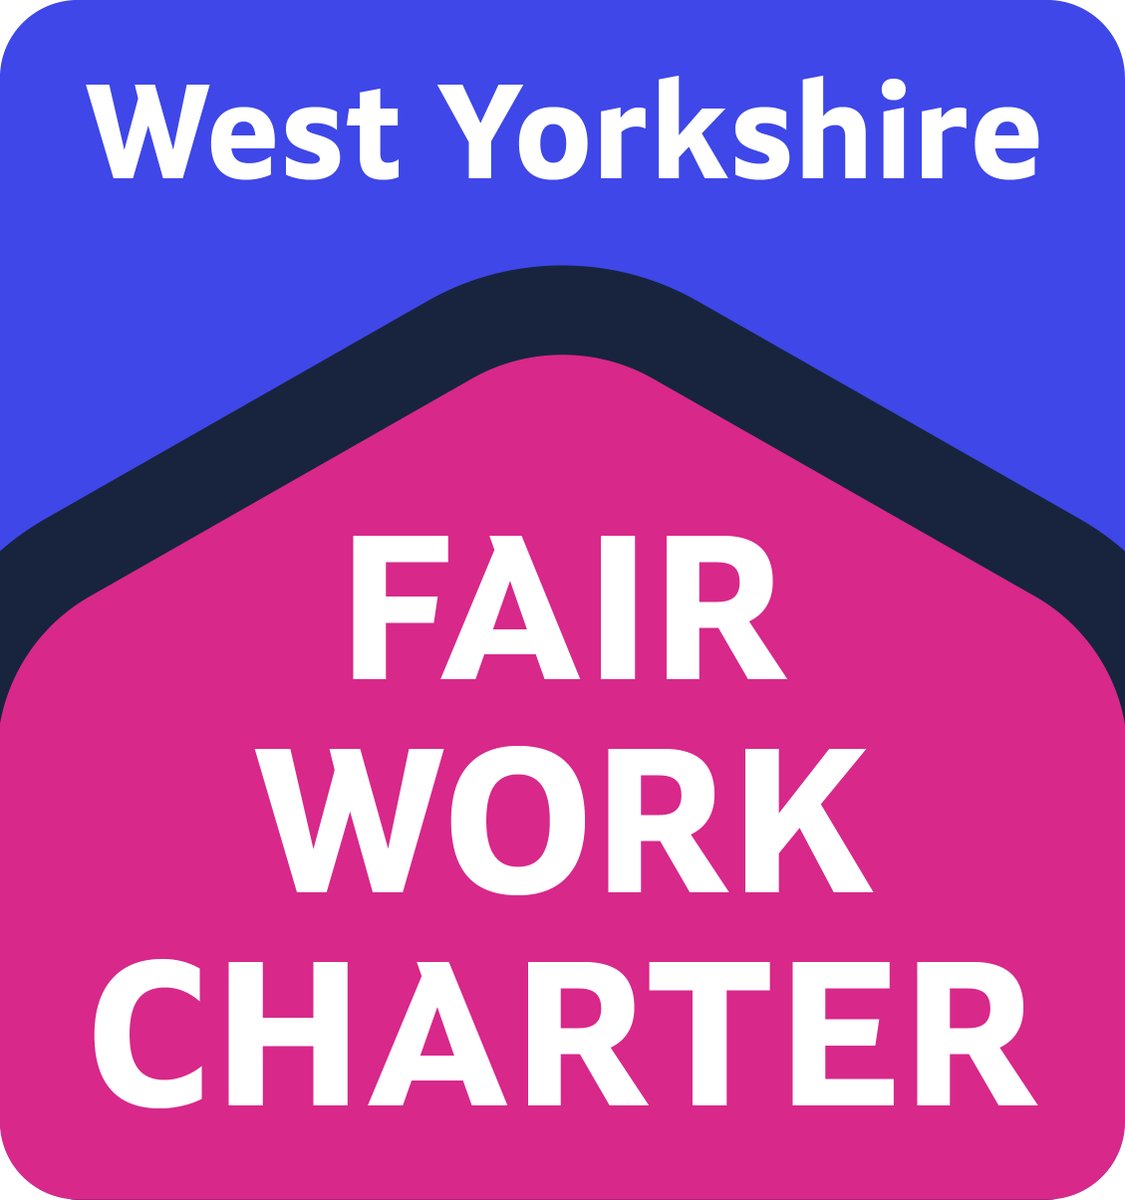 🎉 Exciting news! We are proud to be one of the latest certified members of the West Yorkshire Fair Work Charter! 🤔 What does this mean for Healthy Minds? 👉 Read all about it on our blog! healthymindscalderdale.co.uk/news/healthy-m… #WestYorkshire #FairWorkCharter